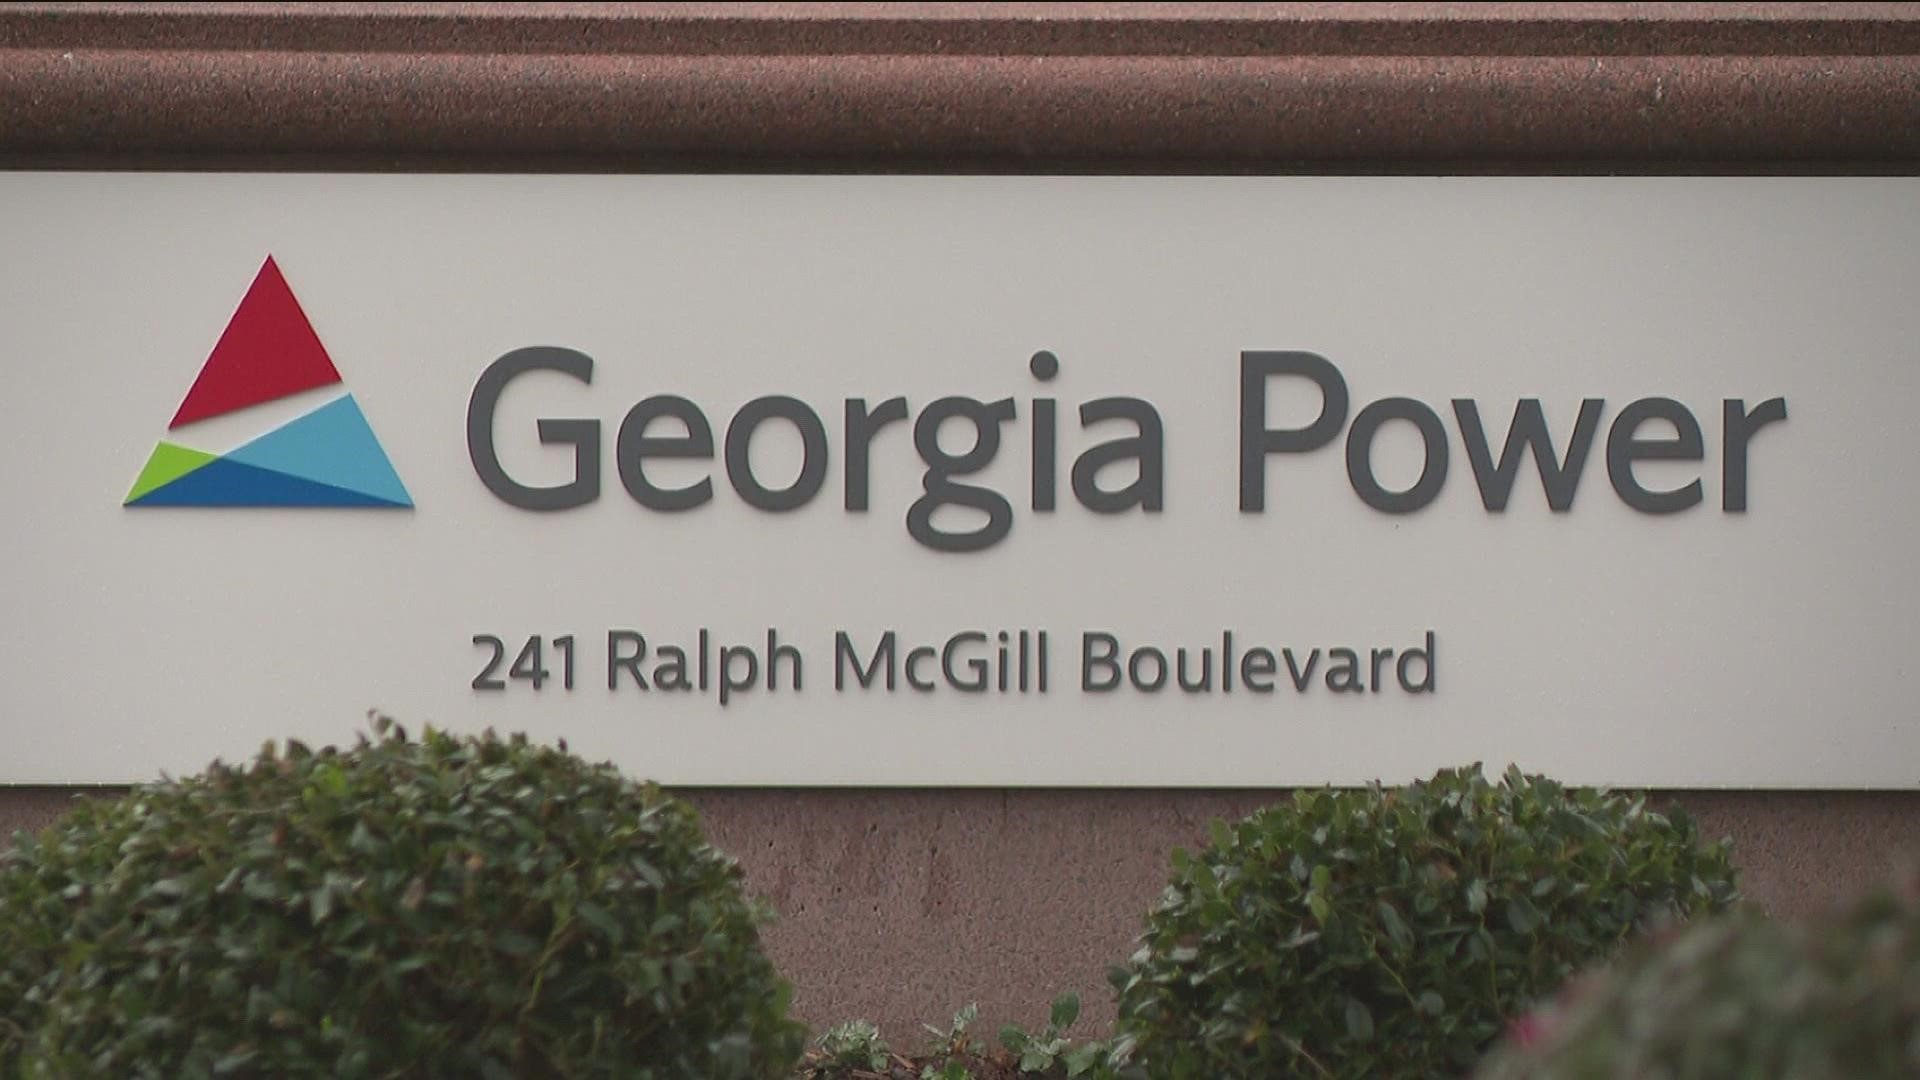 Supporters of the rate increase framed it as a compromise because Georgia Power had asked for one much larger.